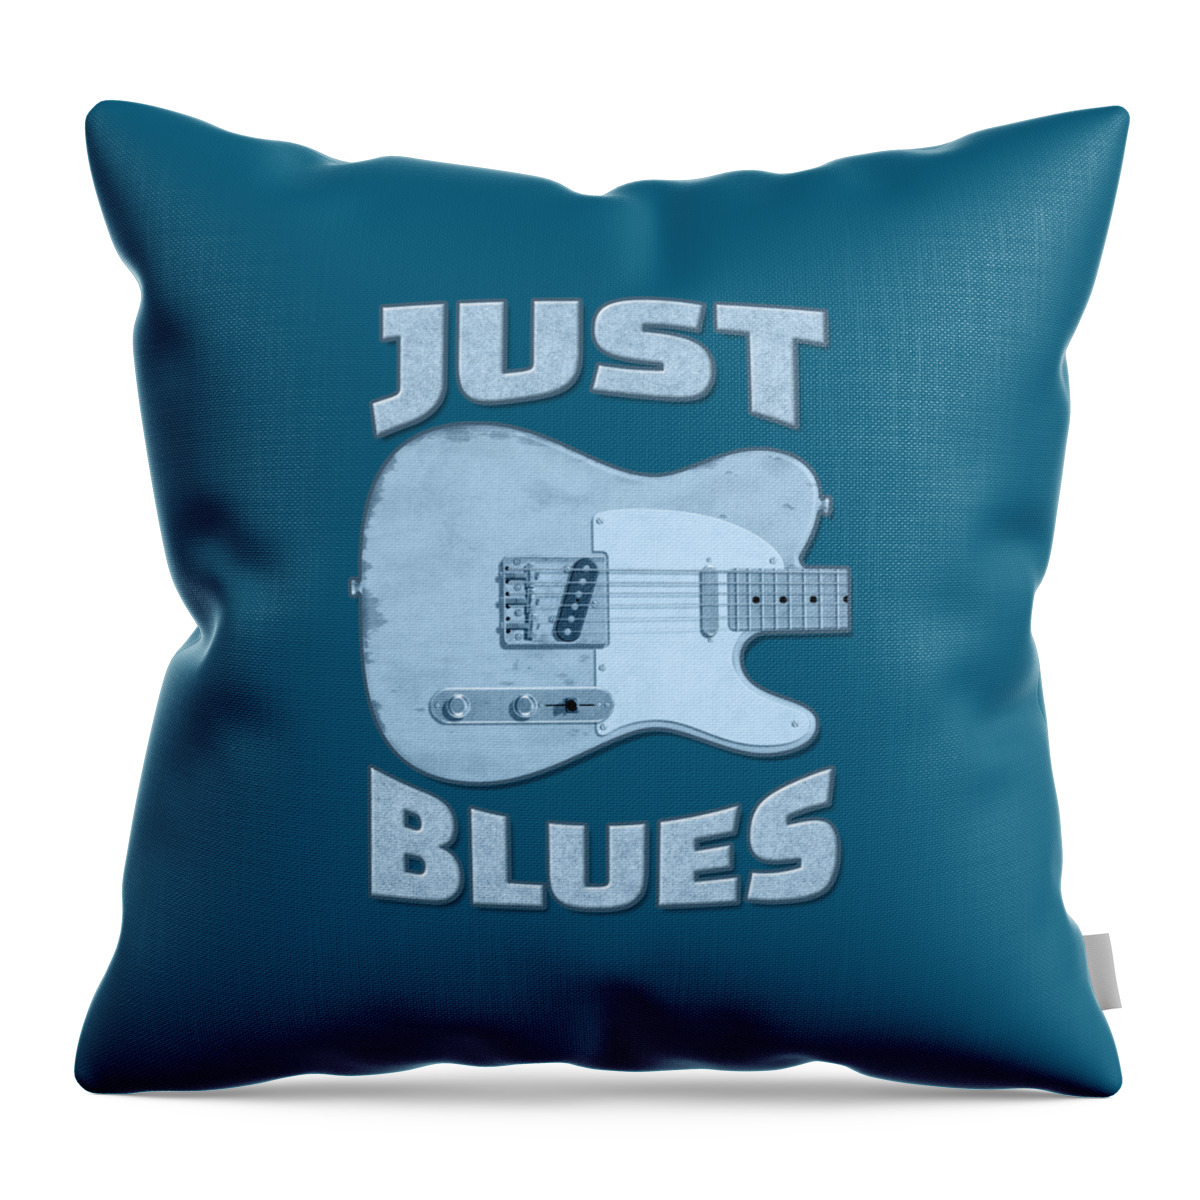 Blues Throw Pillow featuring the digital art Just Blues Shirt by WB Johnston